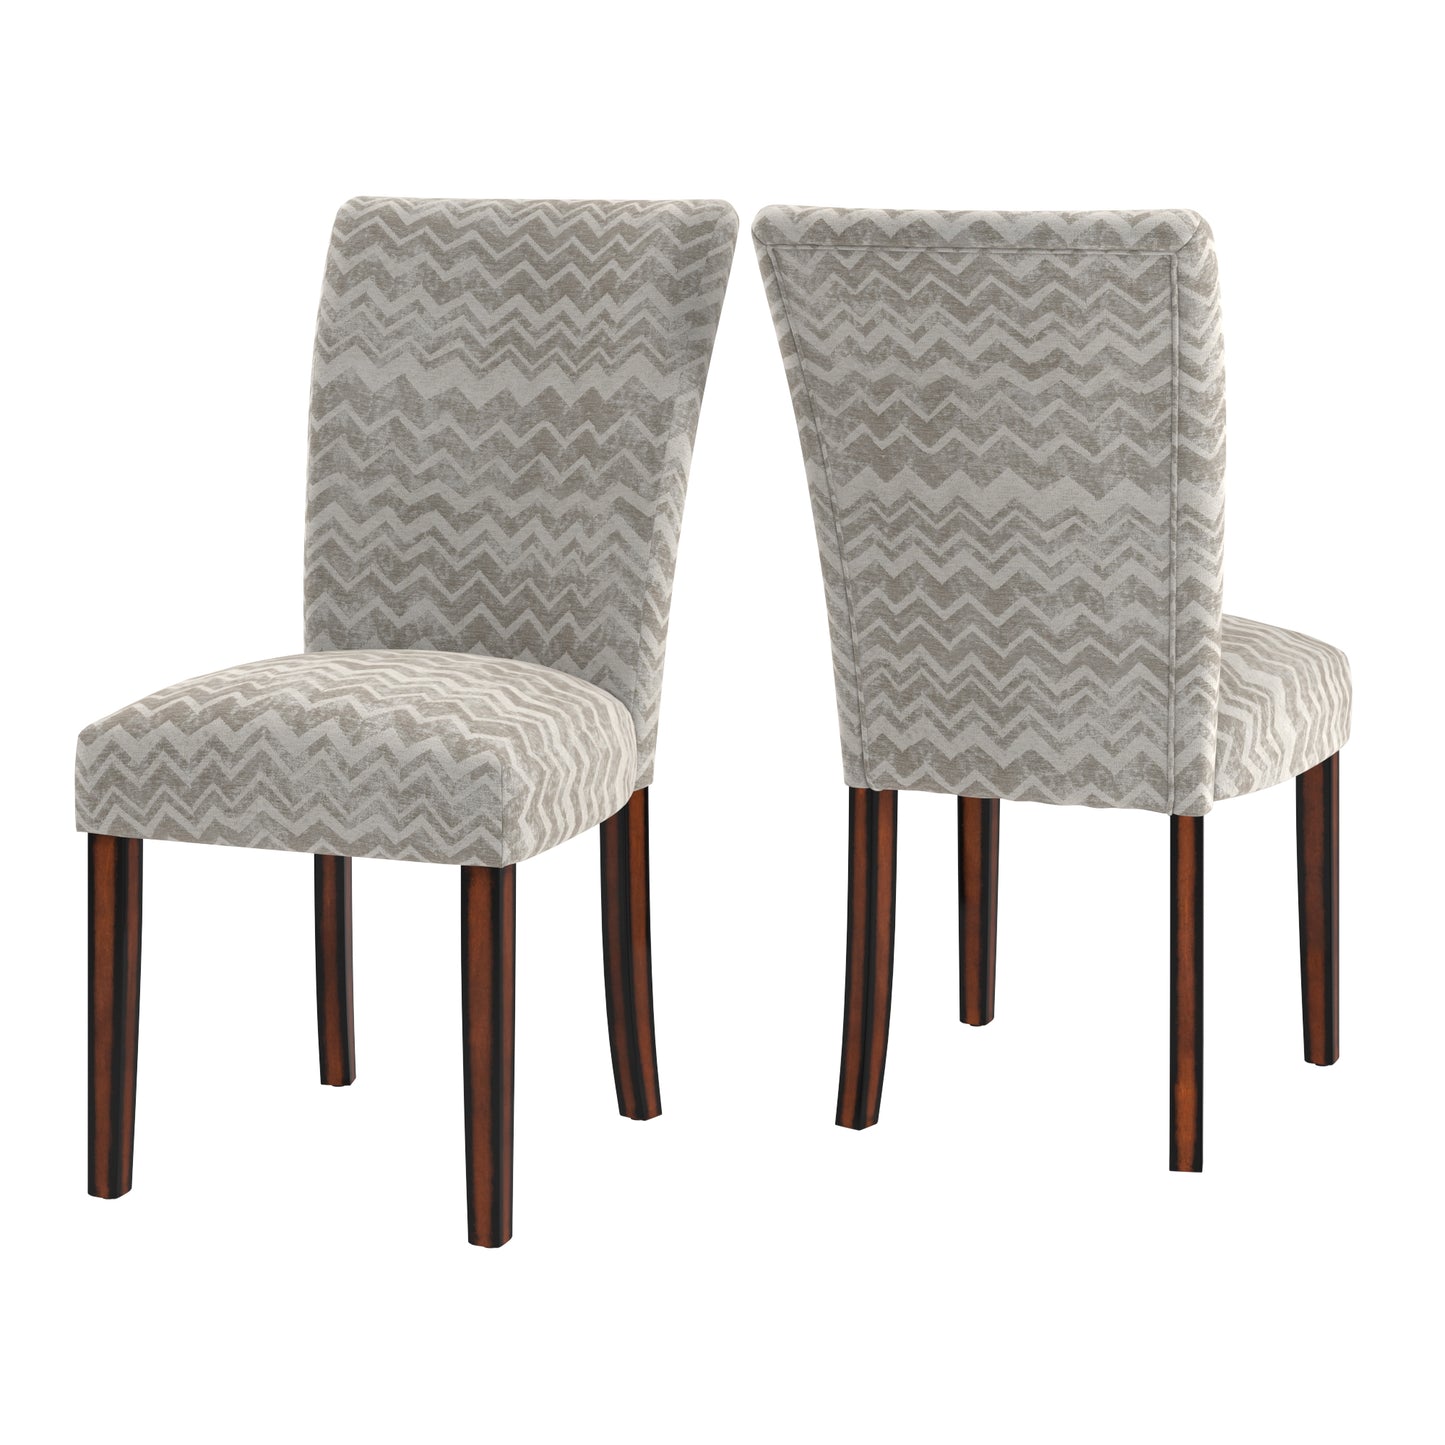 Print Parsons Dining Side Chairs (Set of 2) - Esprasso Finish, Gray Chavron Print Fabric